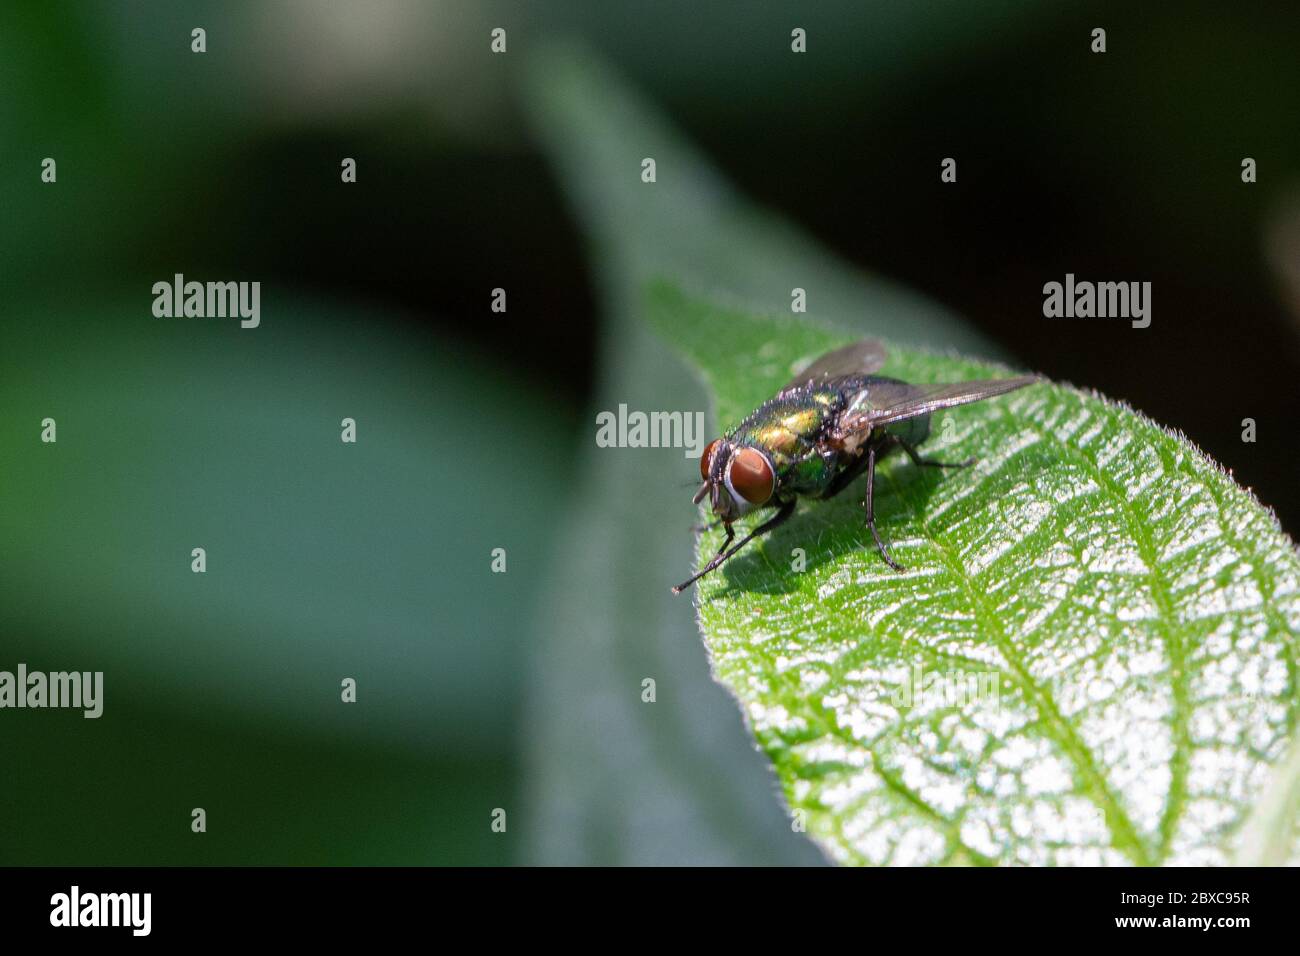 Lucilia sericata, commonly called green fly, resting on a large leaf. Insect image of the order of Diptera Stock Photo